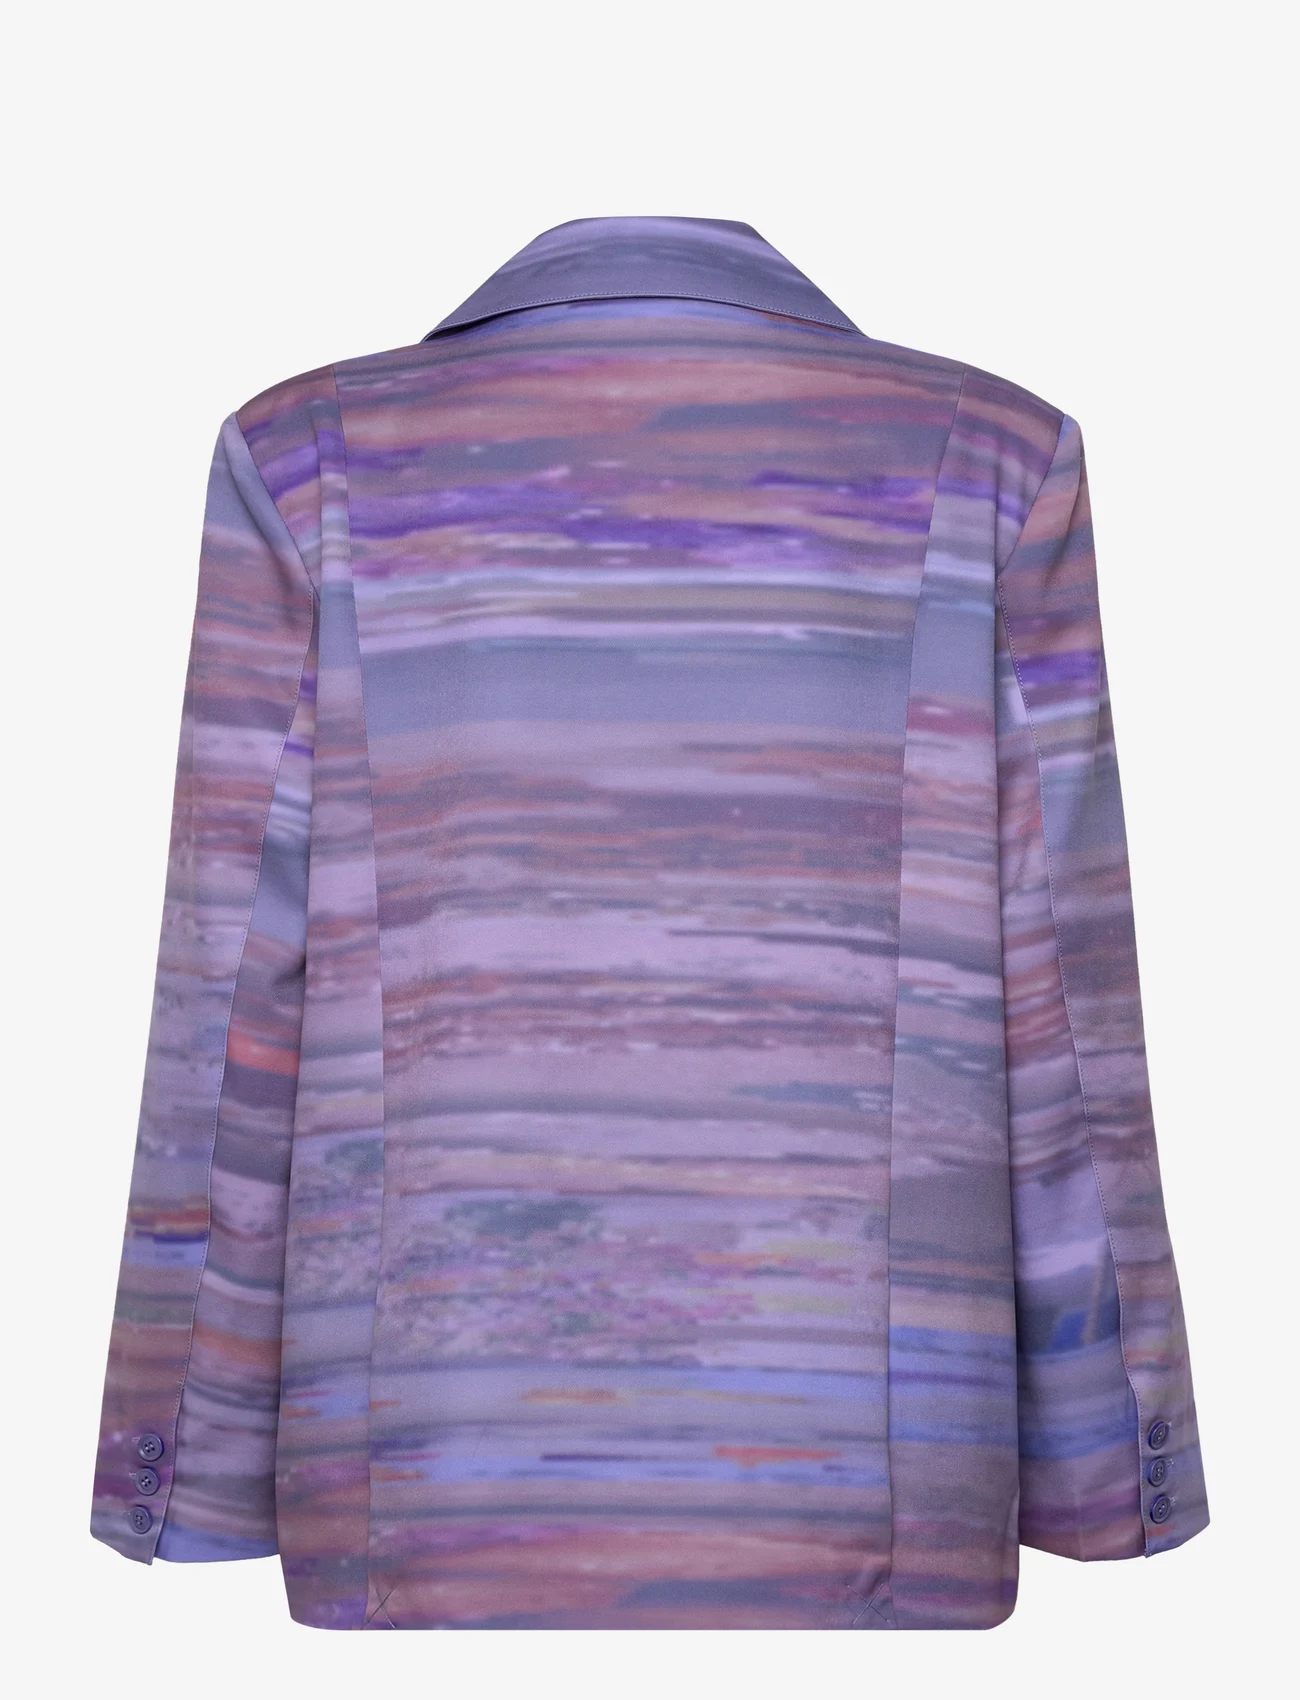 Hosbjerg - Line Adele Blazer - party wear at outlet prices - abstract dinner purple - 1